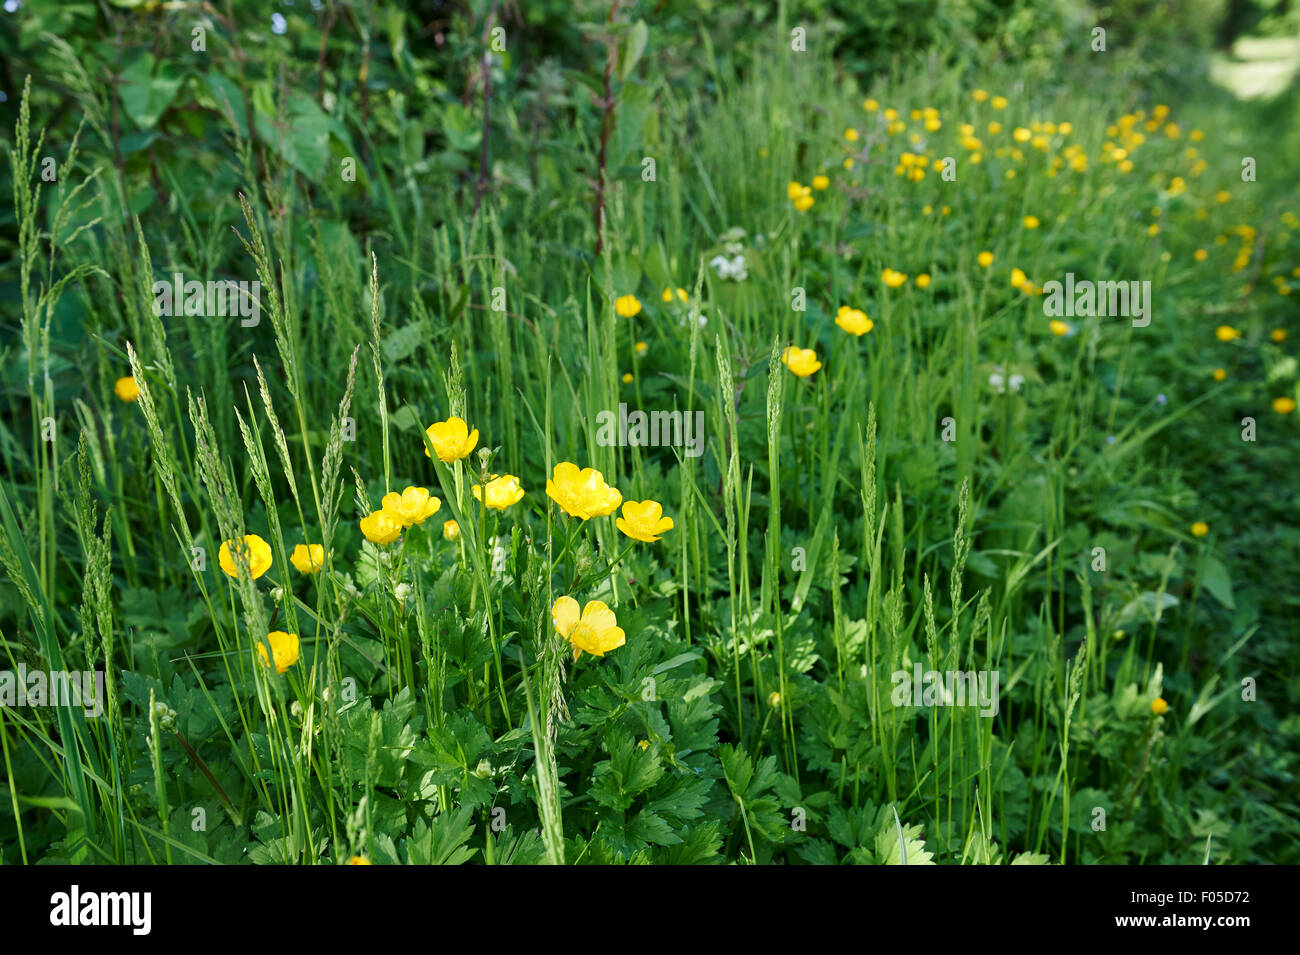 Conservation habitat area on agricultural land with native plants grasses and Bulbous Buttercup flowers (Ranunculus bulbosus). Stock Photo